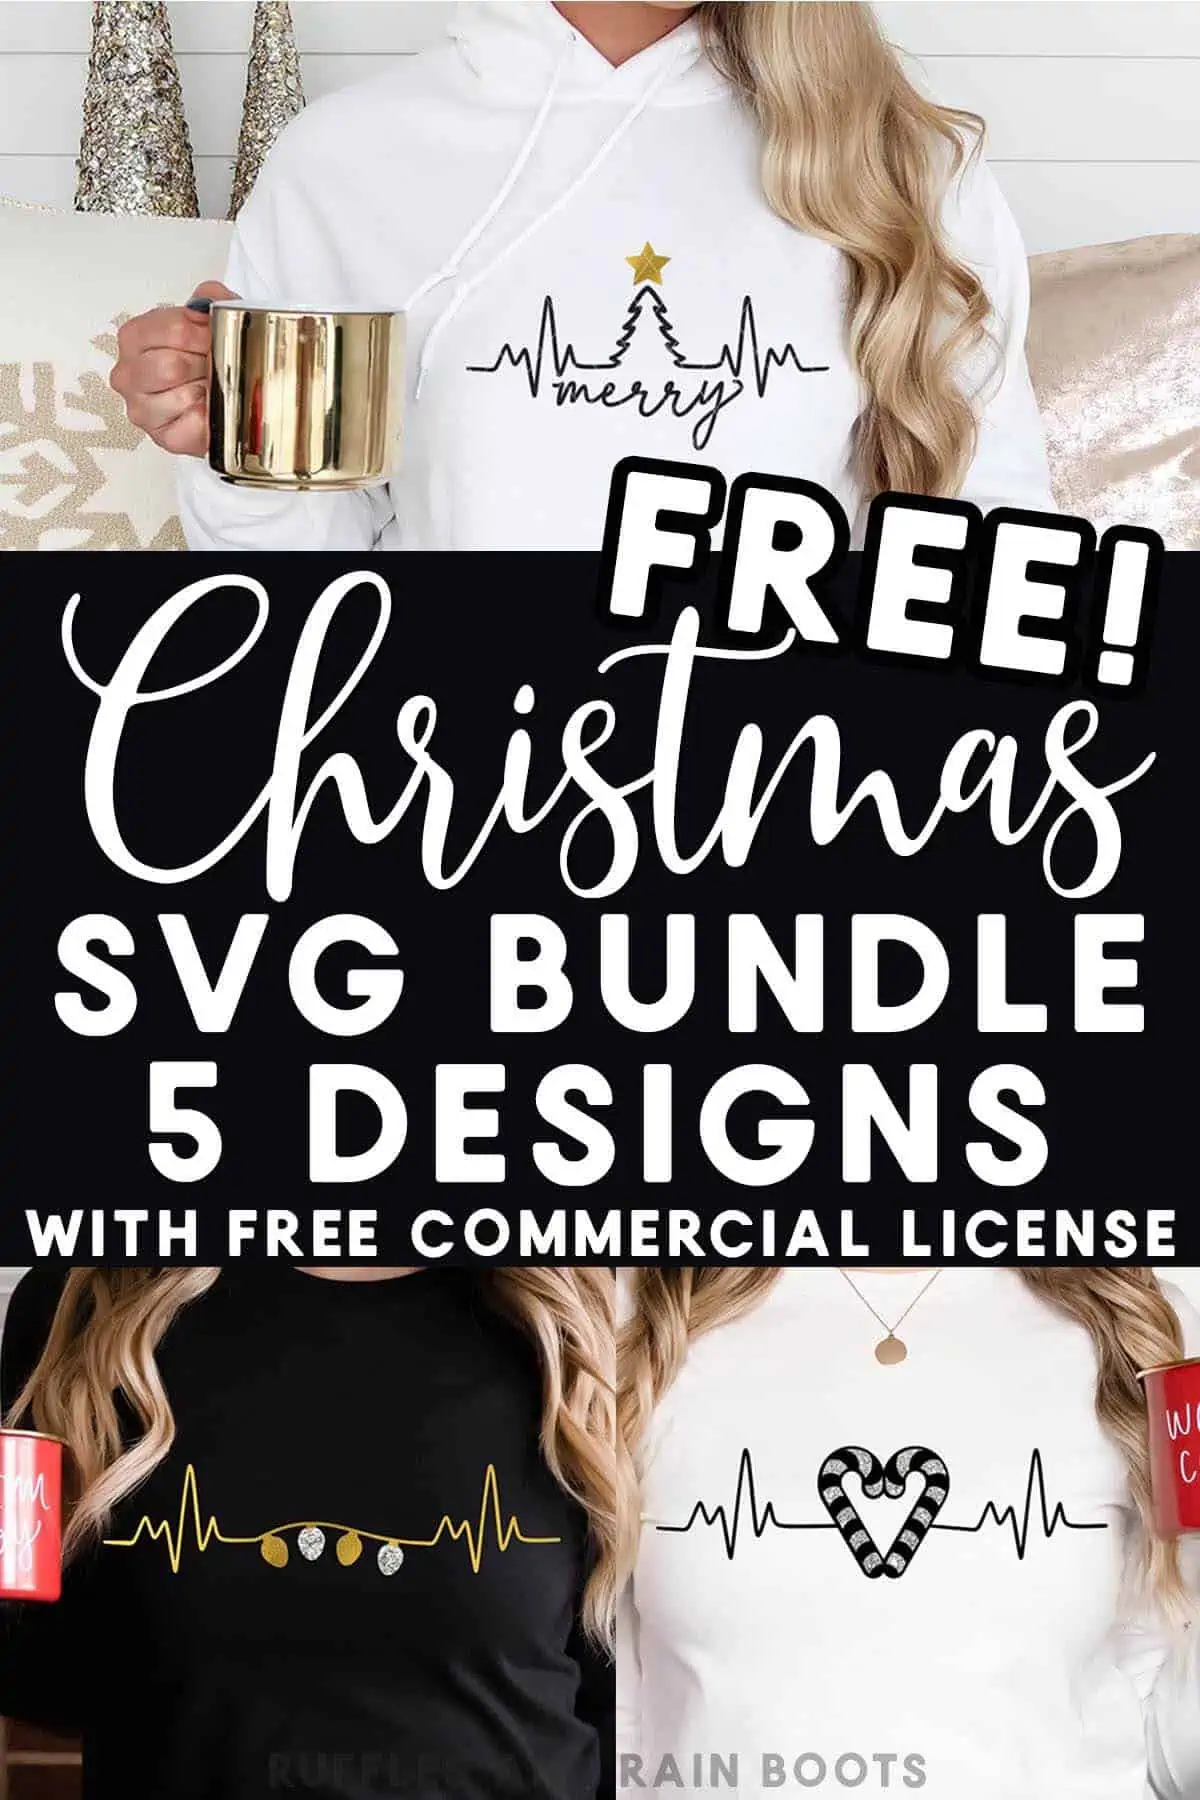 Three image collage of women wearing hoodies and t-shirts with text which reads free Christmas svg bundle with 5 designs.